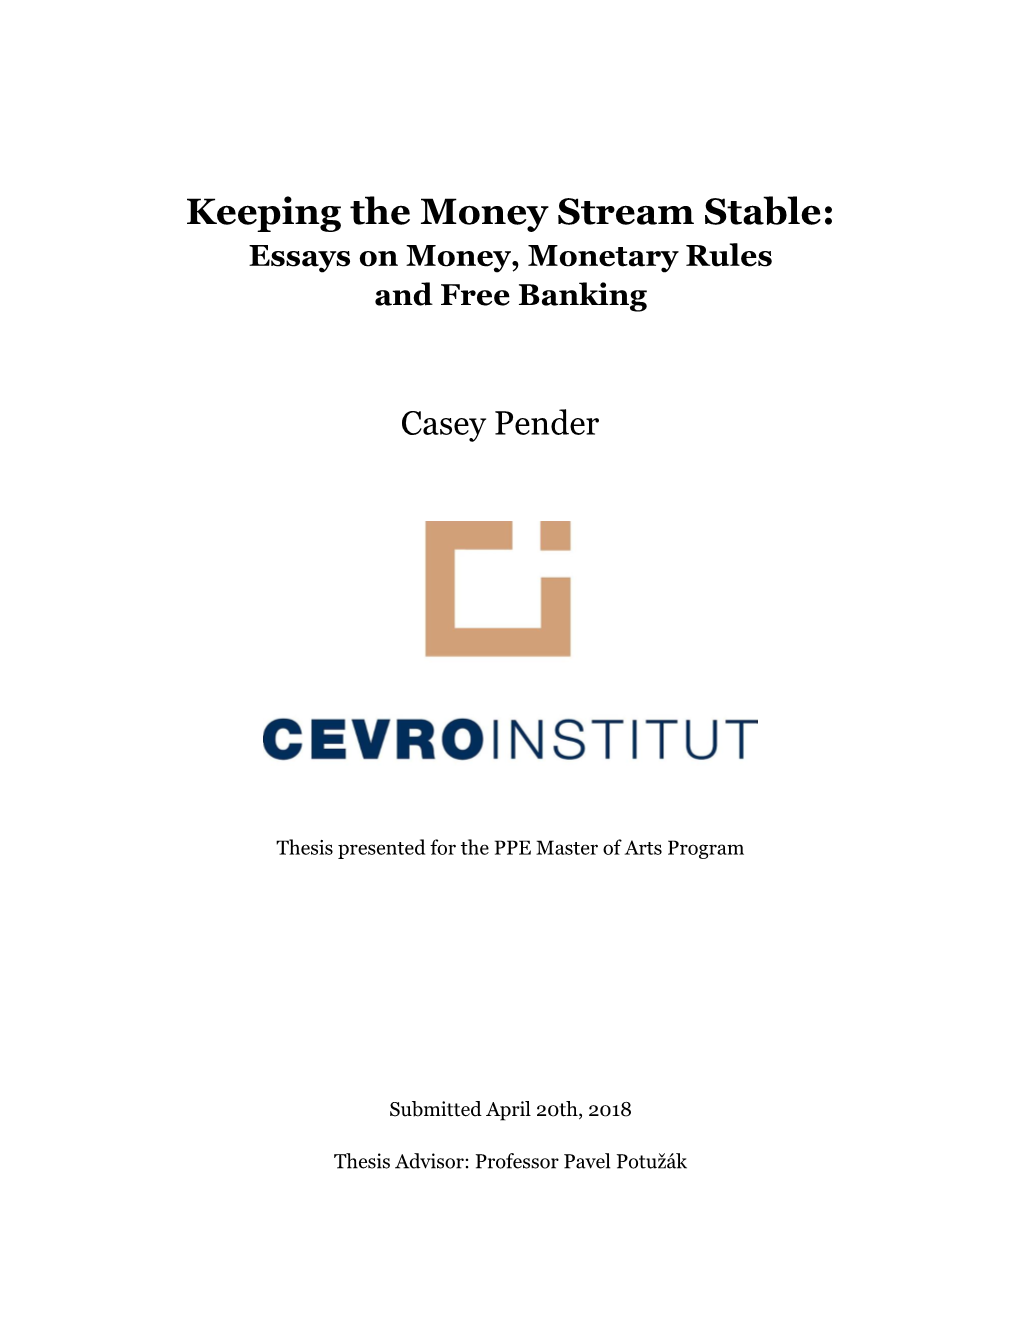 Keeping the Money Stream Stable: Essays on Money, Monetary Rules and Free Banking